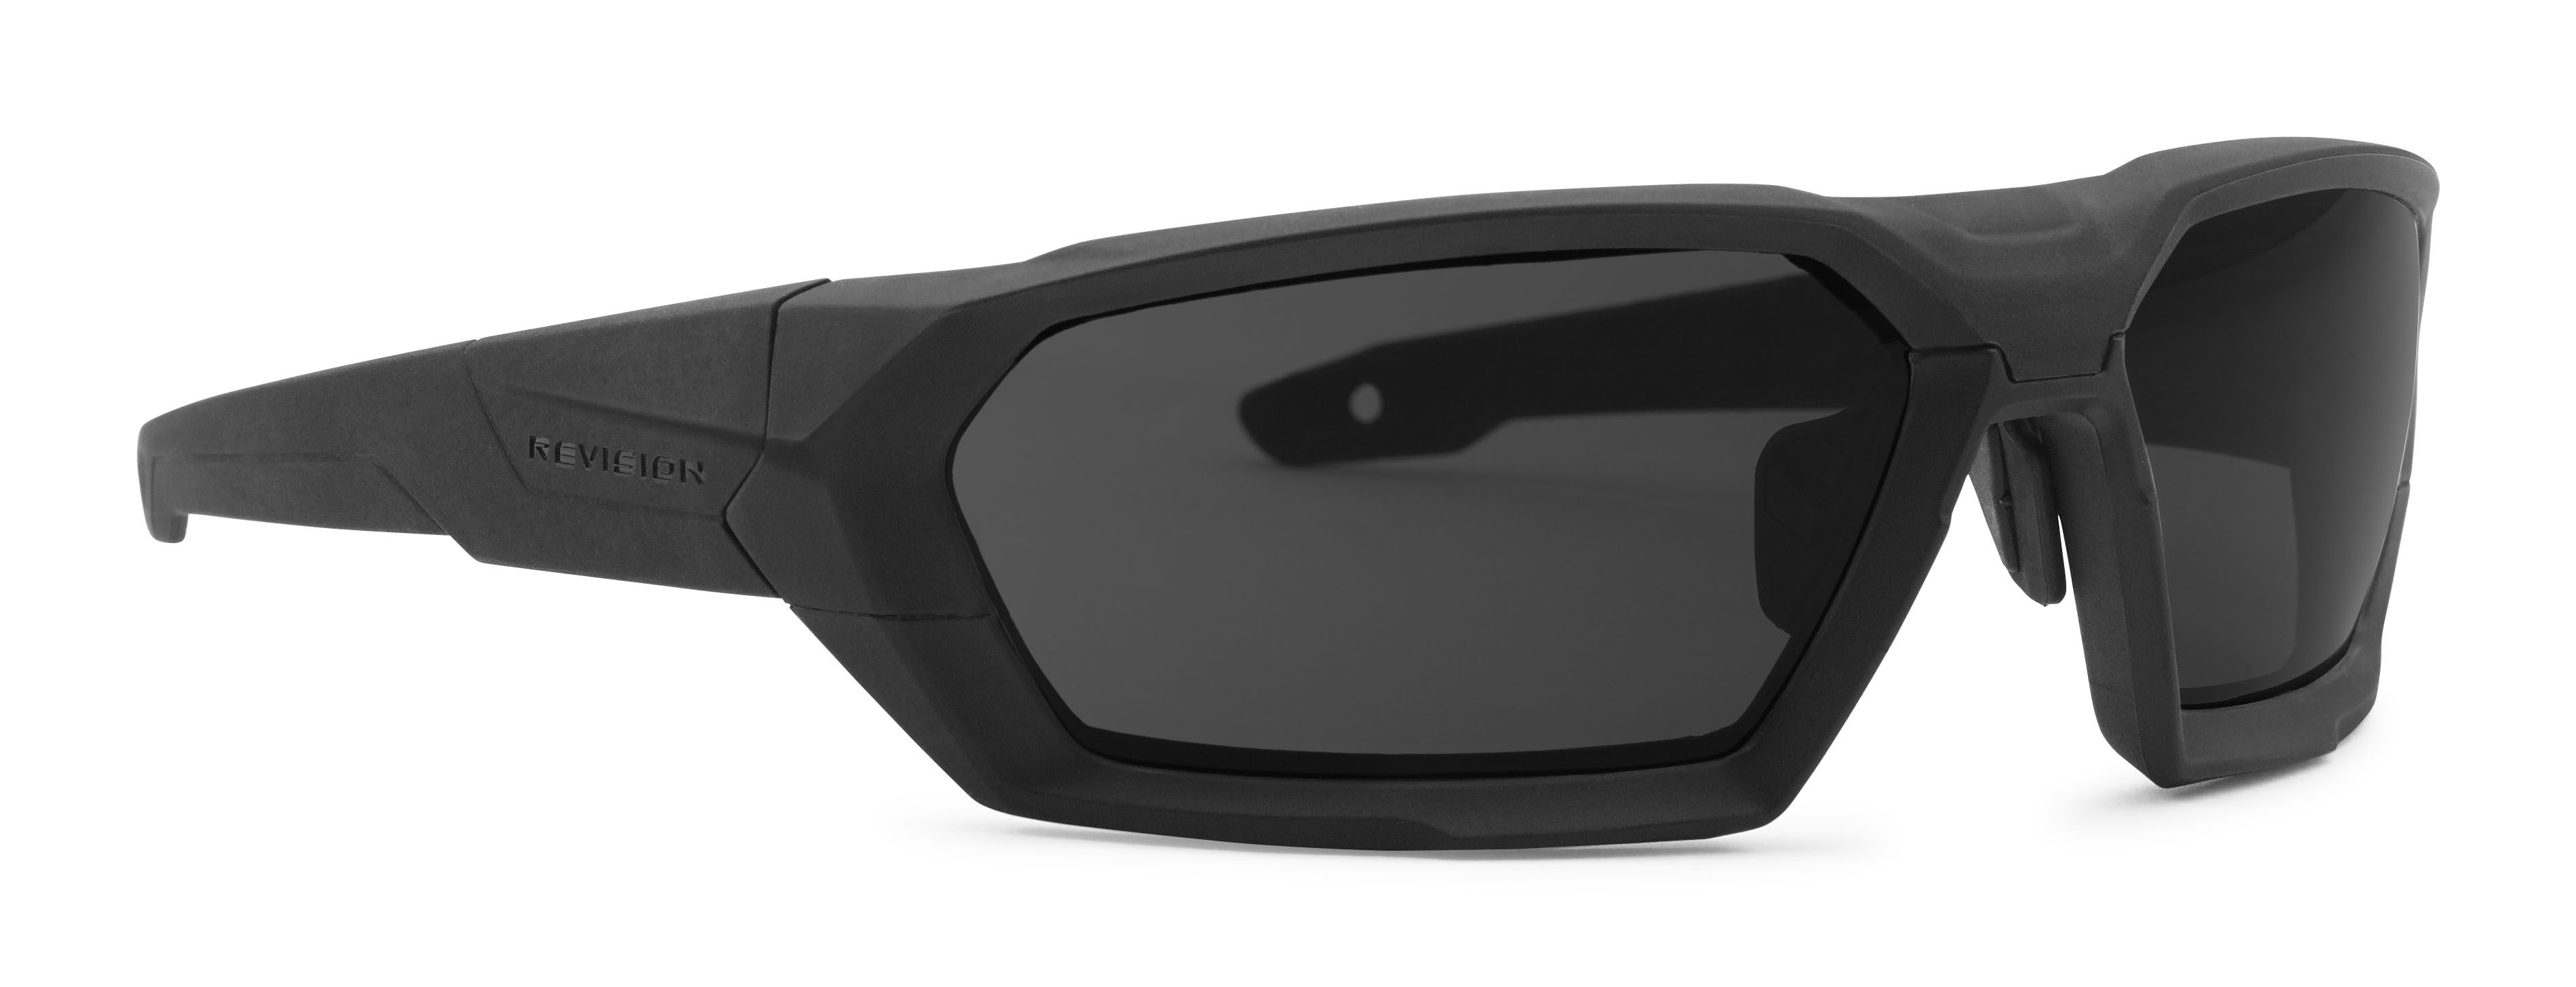 Revision’s ShadowStrike™ Tactical Ballistic Sunglasses offer premium anti-fog protection and interchangeable lenses while exceeding the rigorous U.S. Military eyewear ballistic requirements.